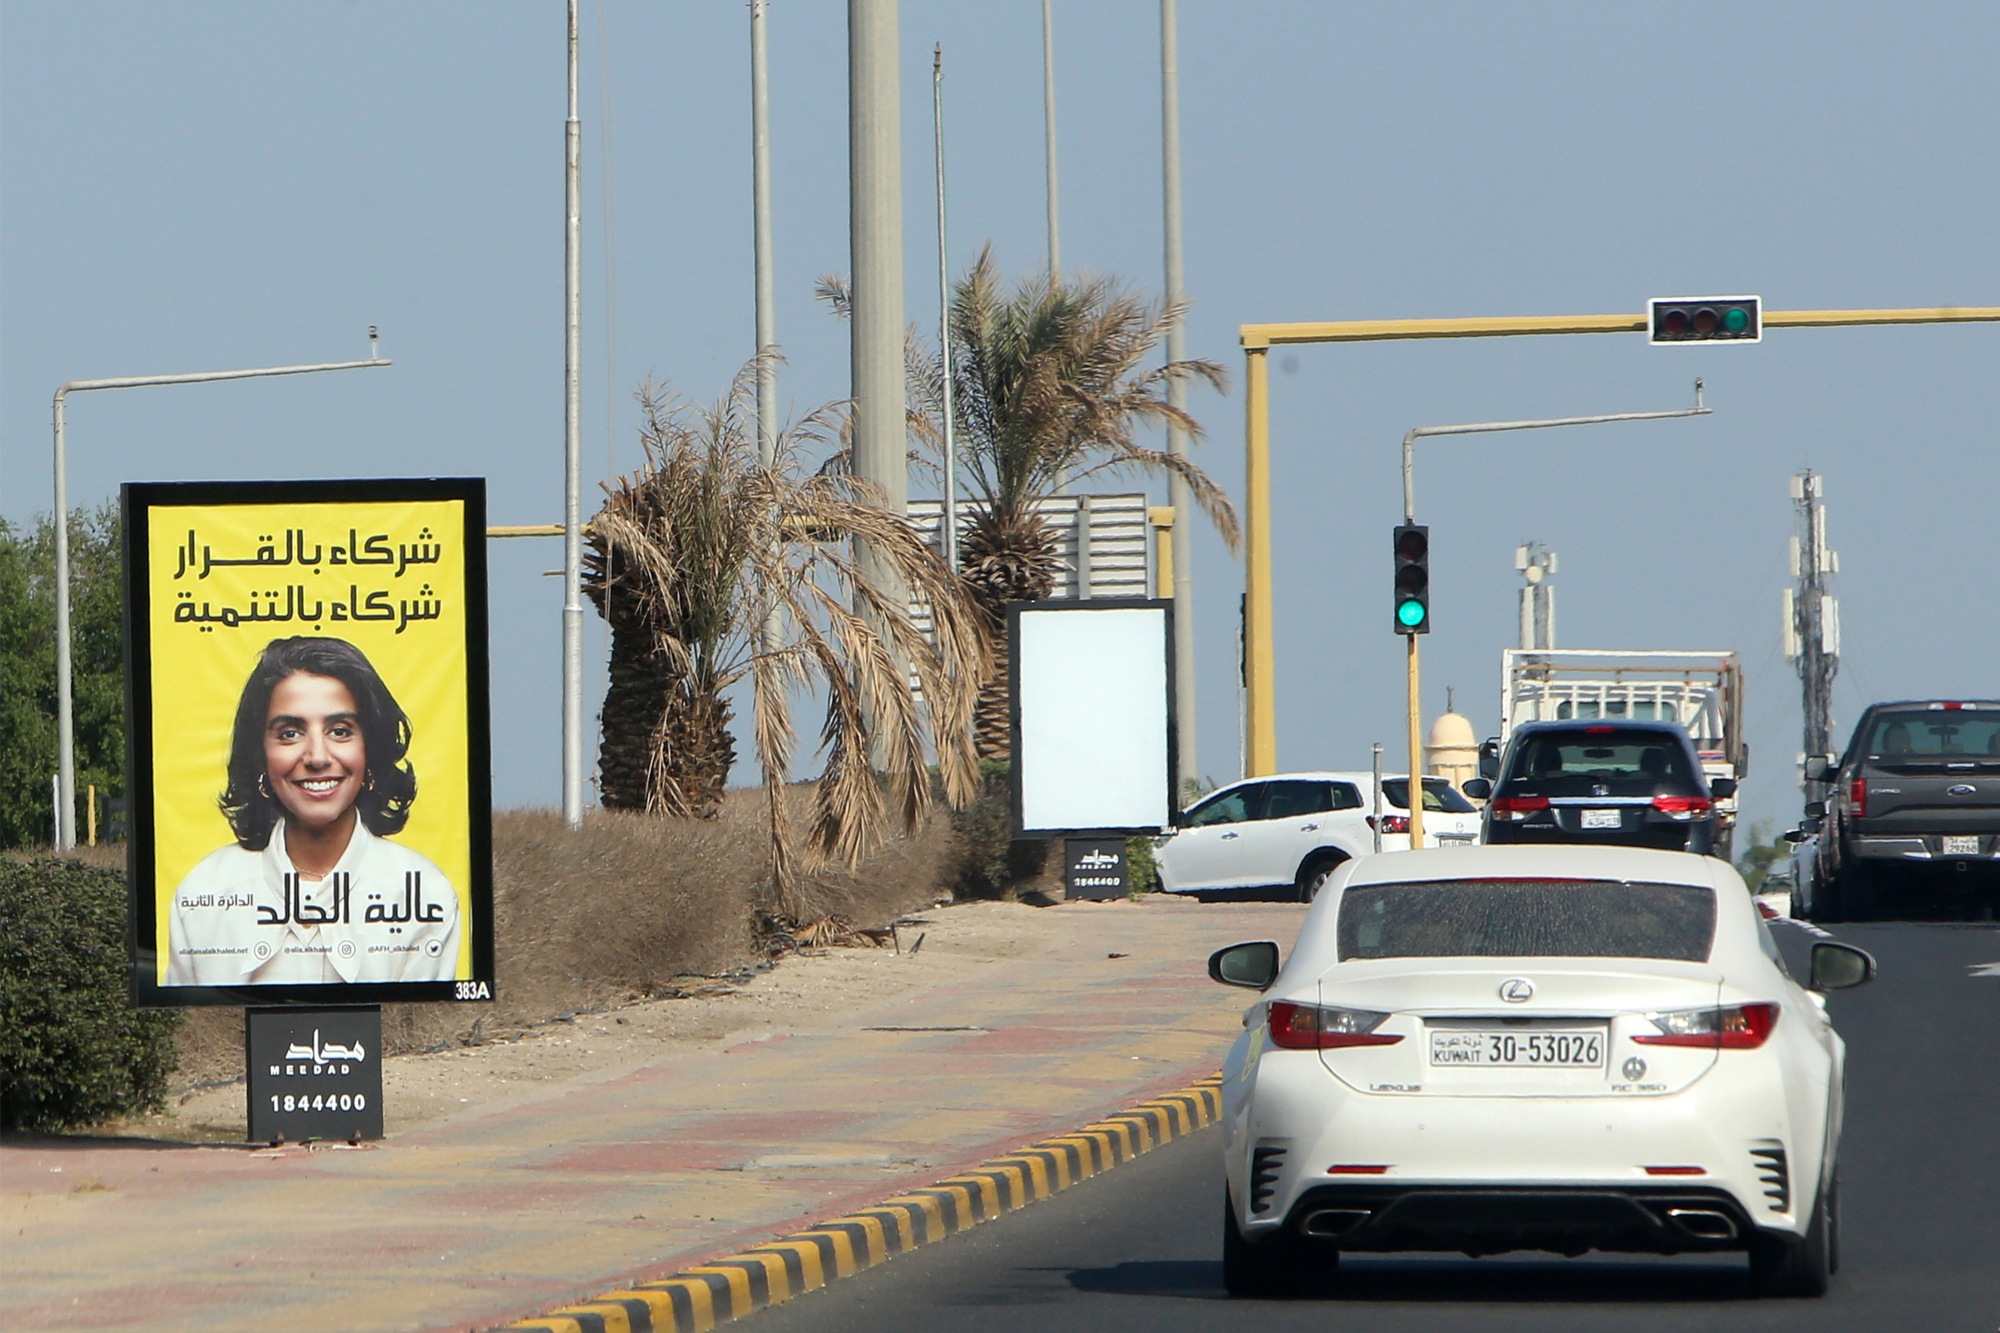 A billboard featuring a candidate running for Kuwait's parliamentary elections is seen in Kuwait city, on 22 November 2020 (AFP)